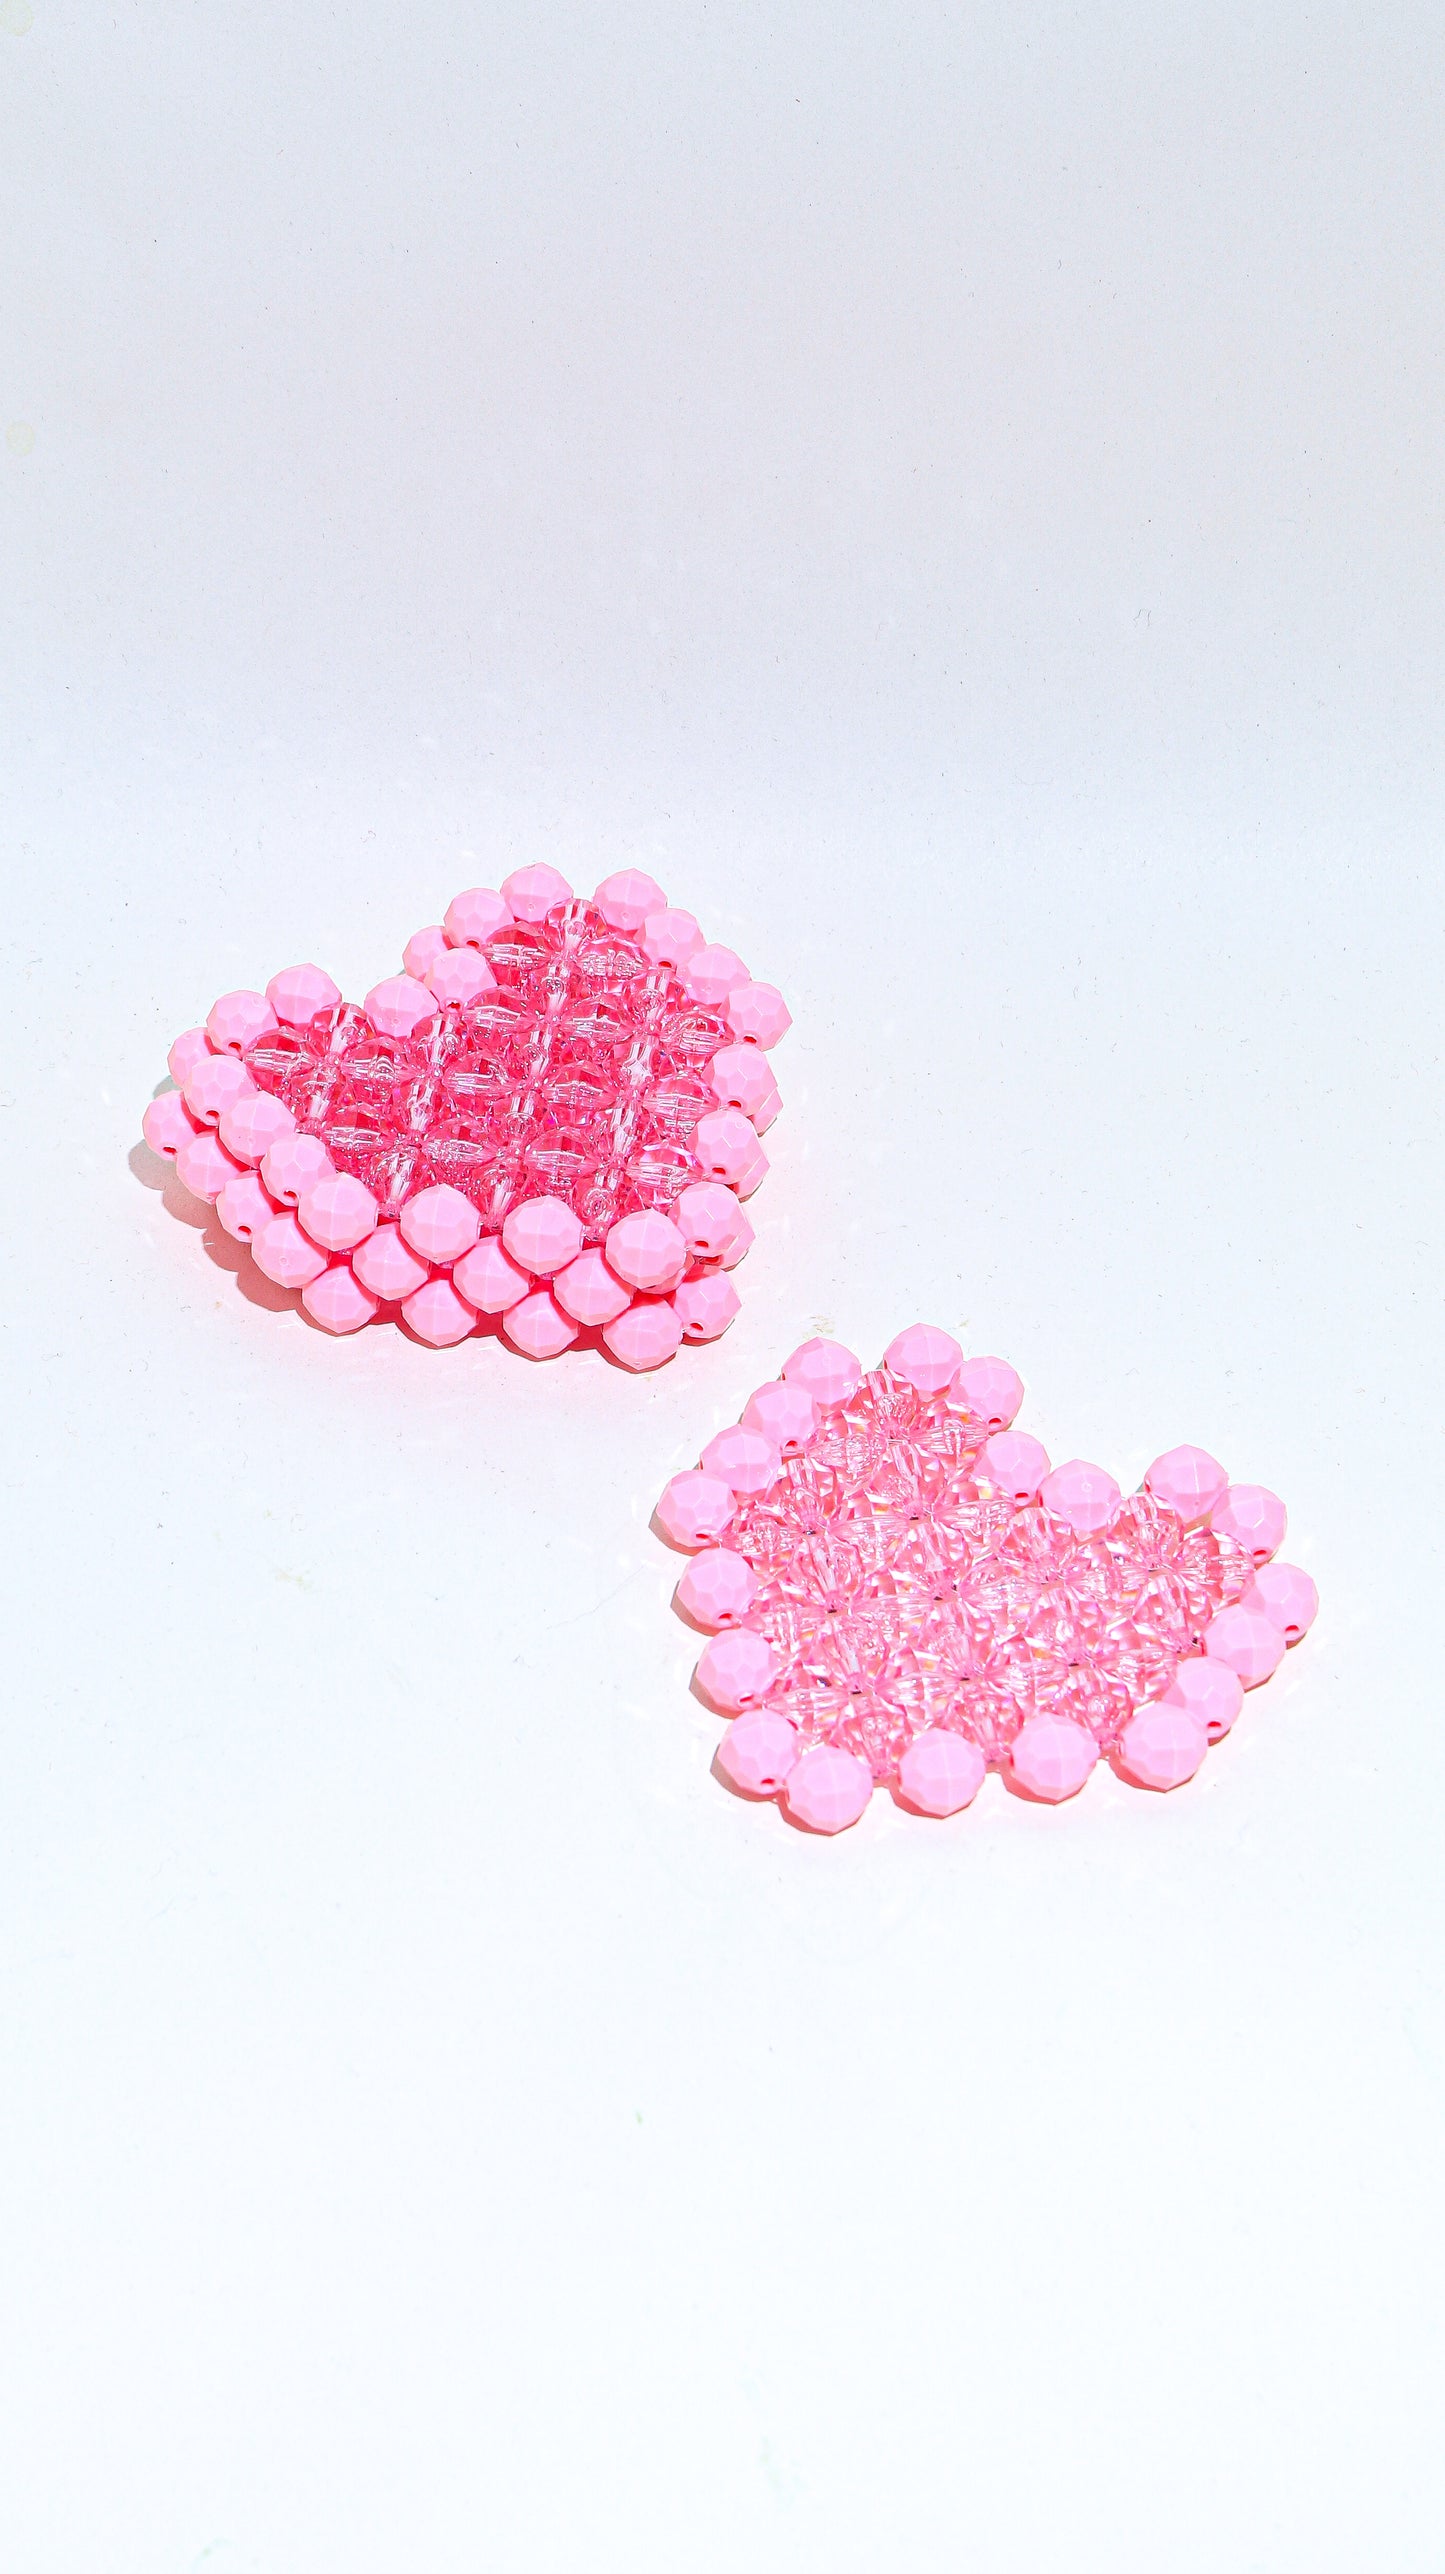 Heart Coasters - Pink